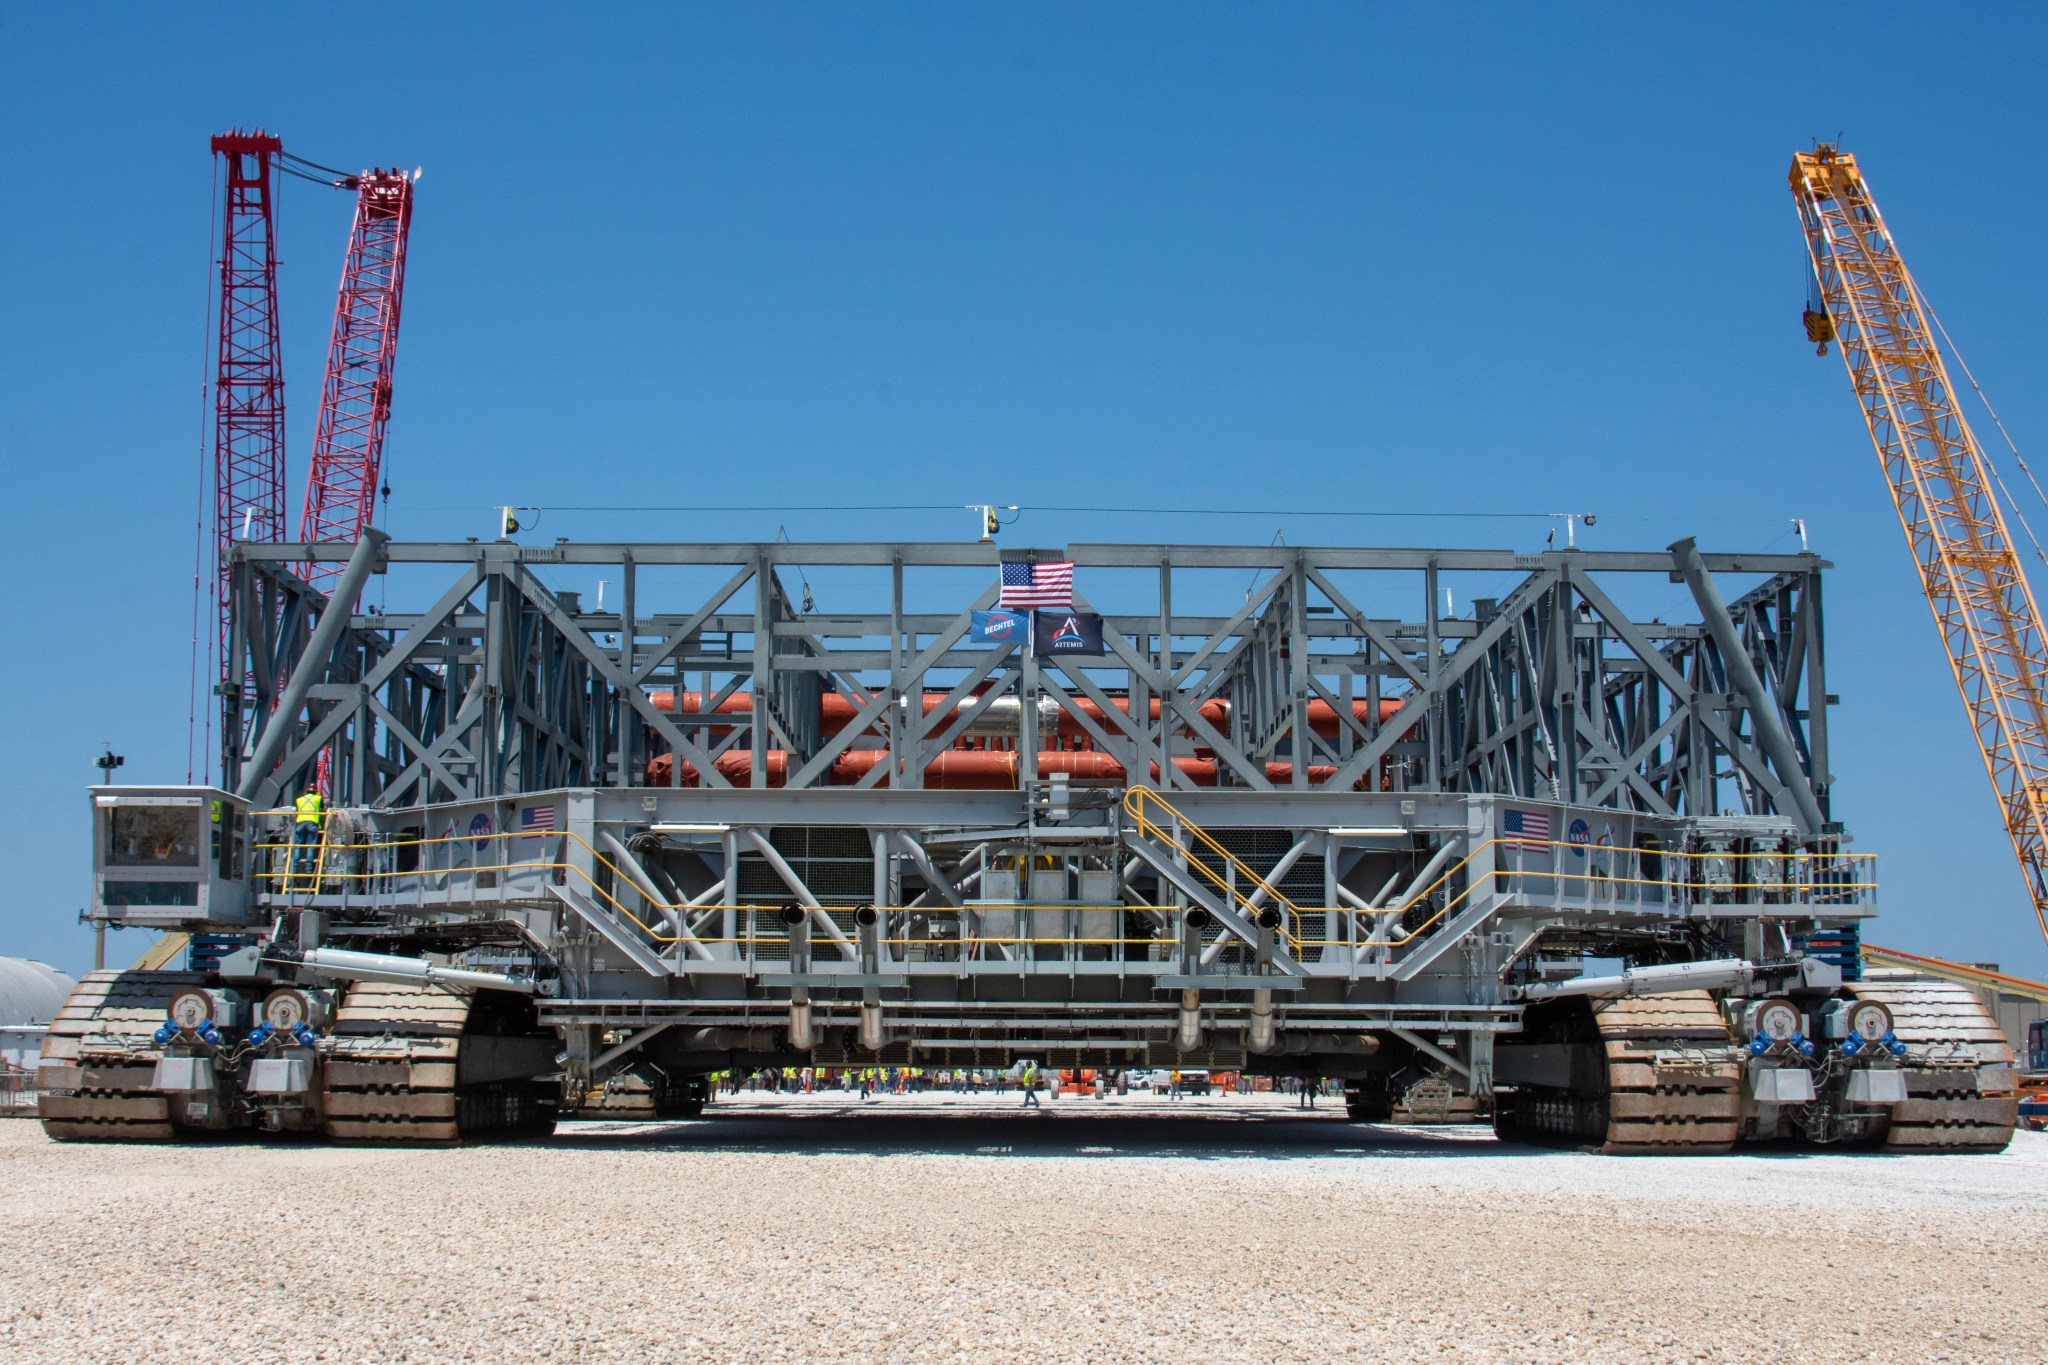 NASA’s New Mobile Launcher Stacks Up for Future Artemis Missions 